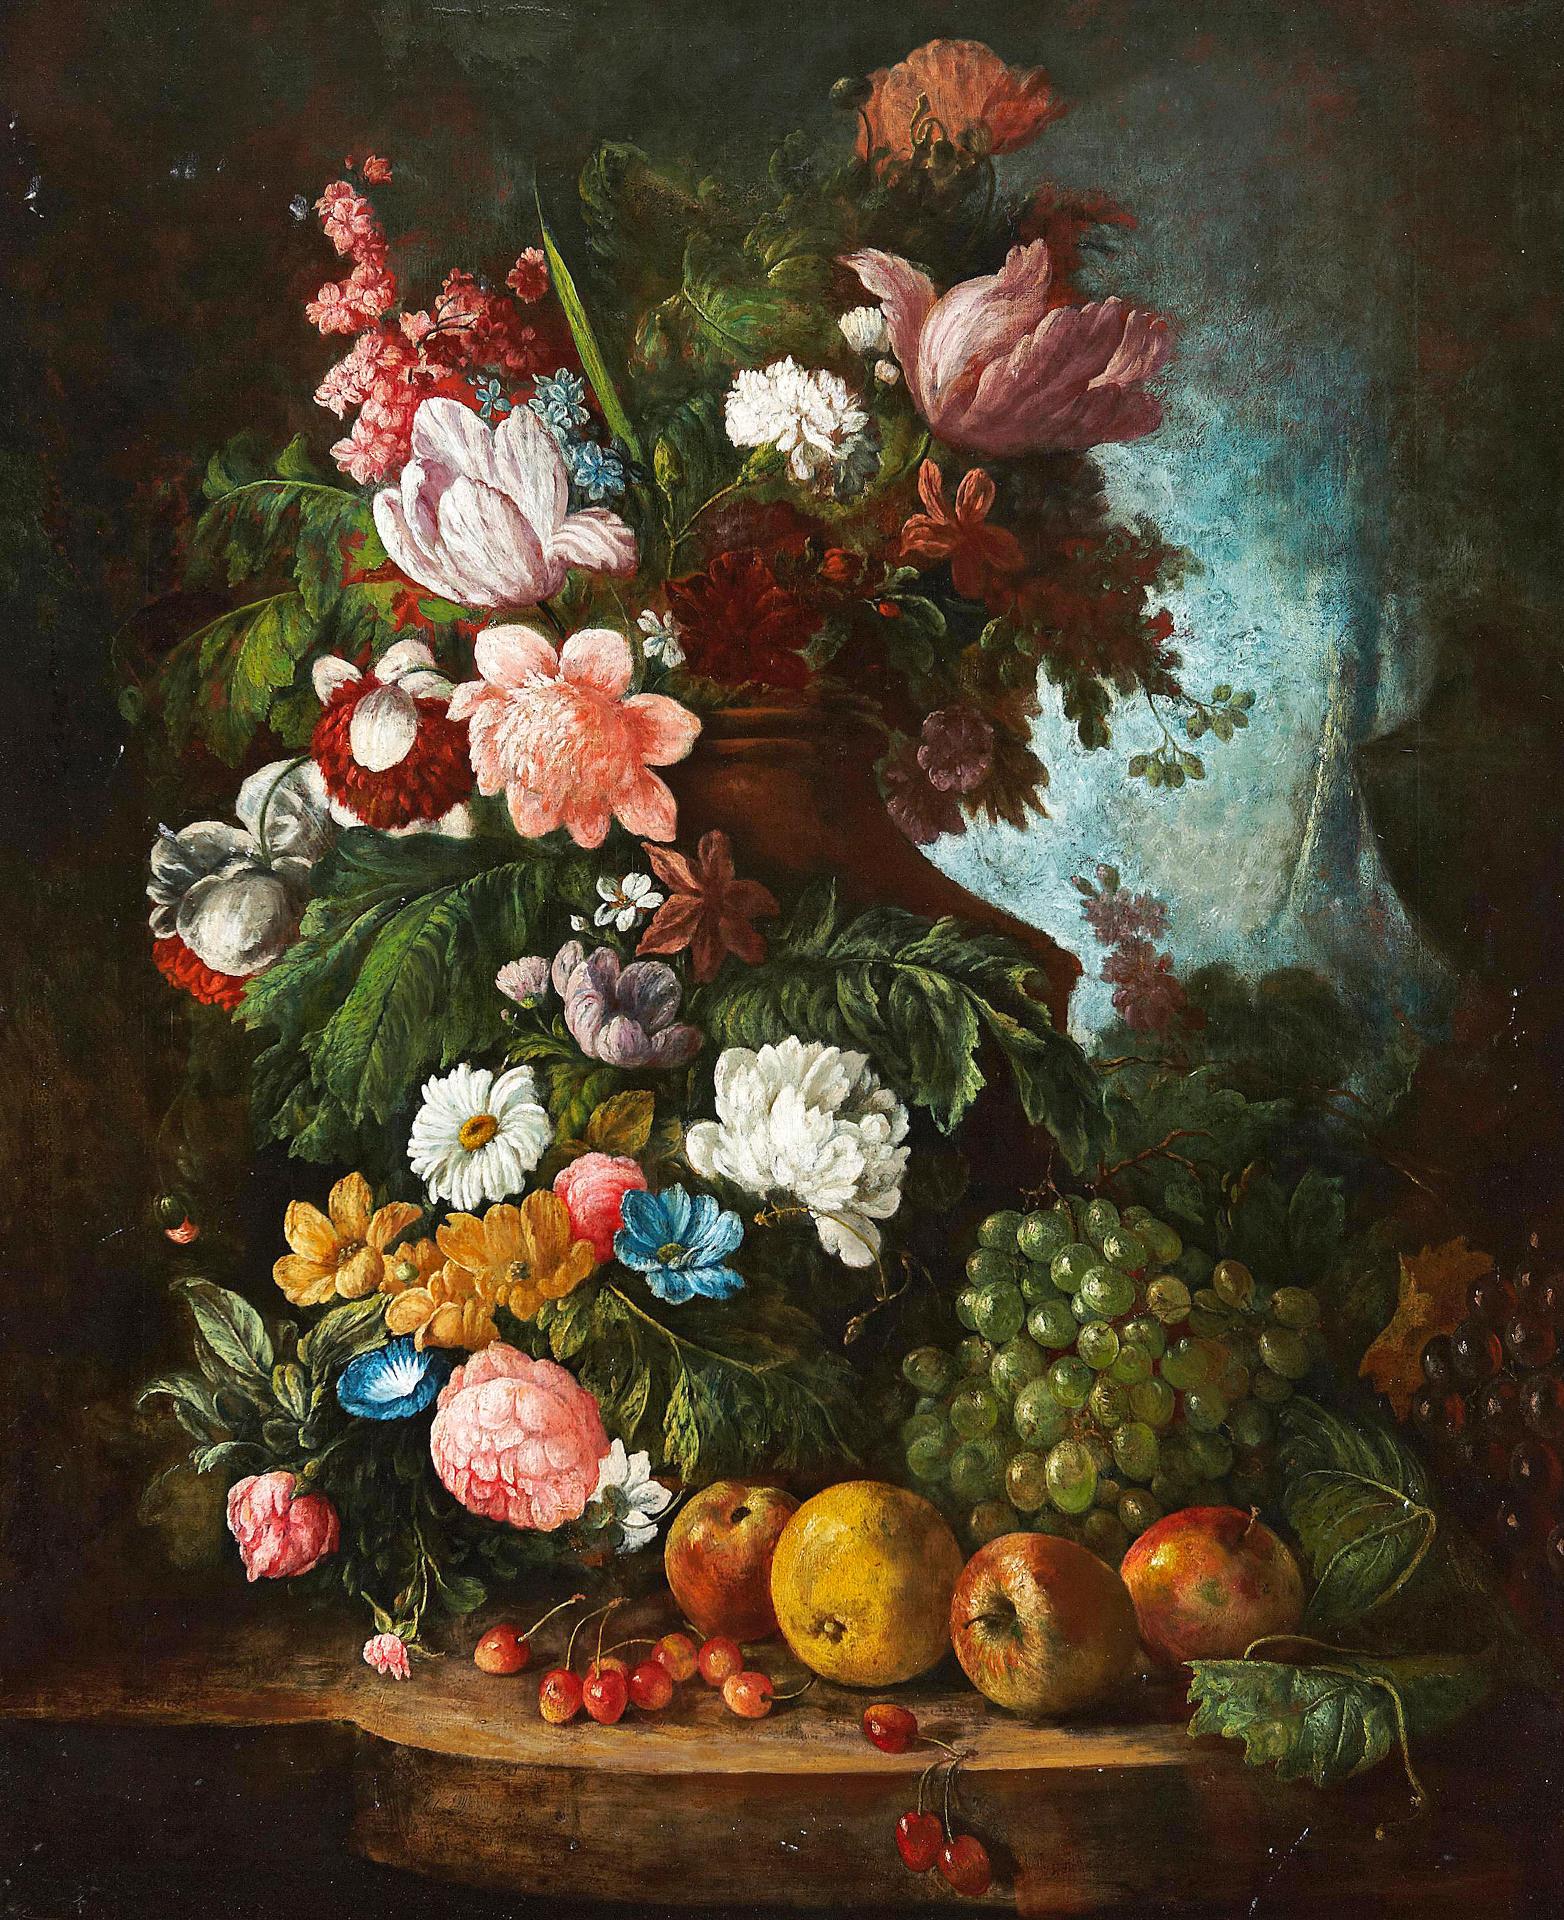 J. van Os - Tulips, carnations, peonies, convolvulus and other flowers in a stone urn with grapes, apples and other fruit on a stone ledge, a landscape beyond.